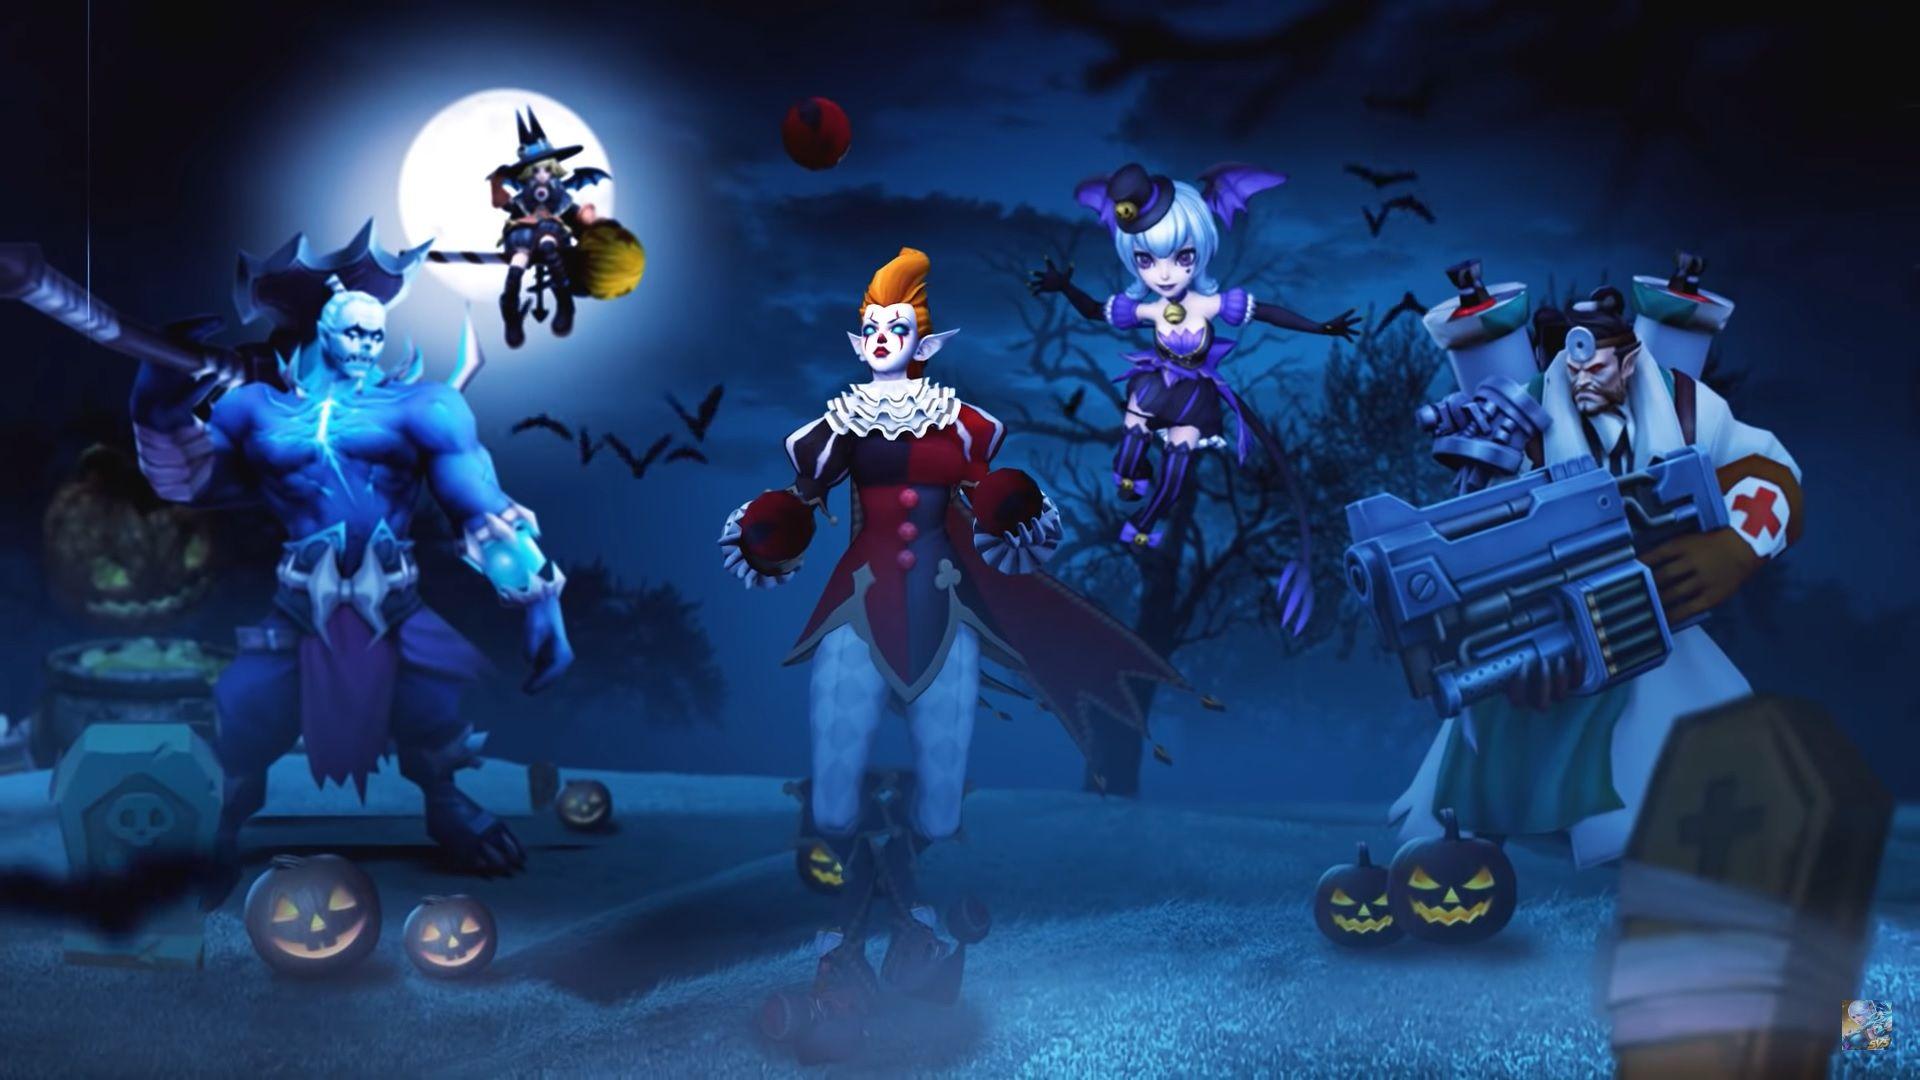 Mobile Legends' Trickster's Eve event is giving away free skins